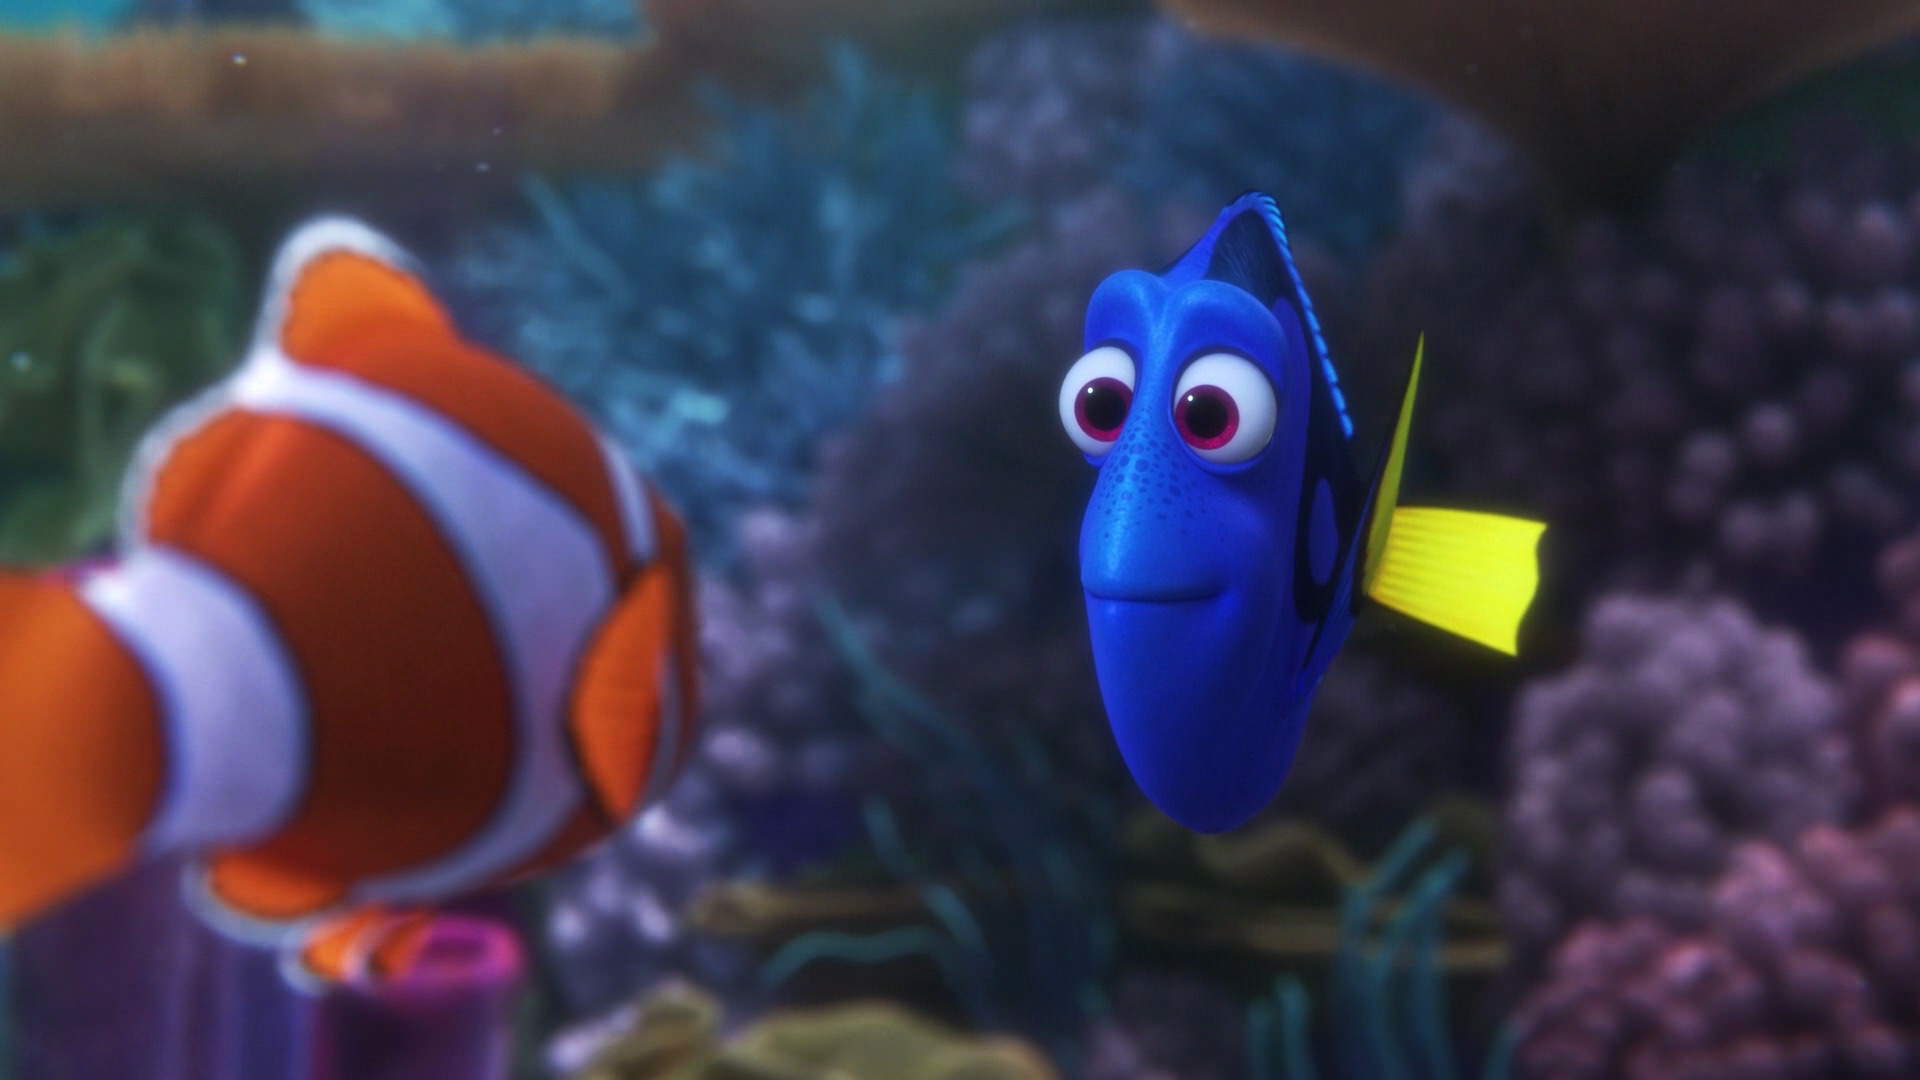 Finding Dory download the last version for apple